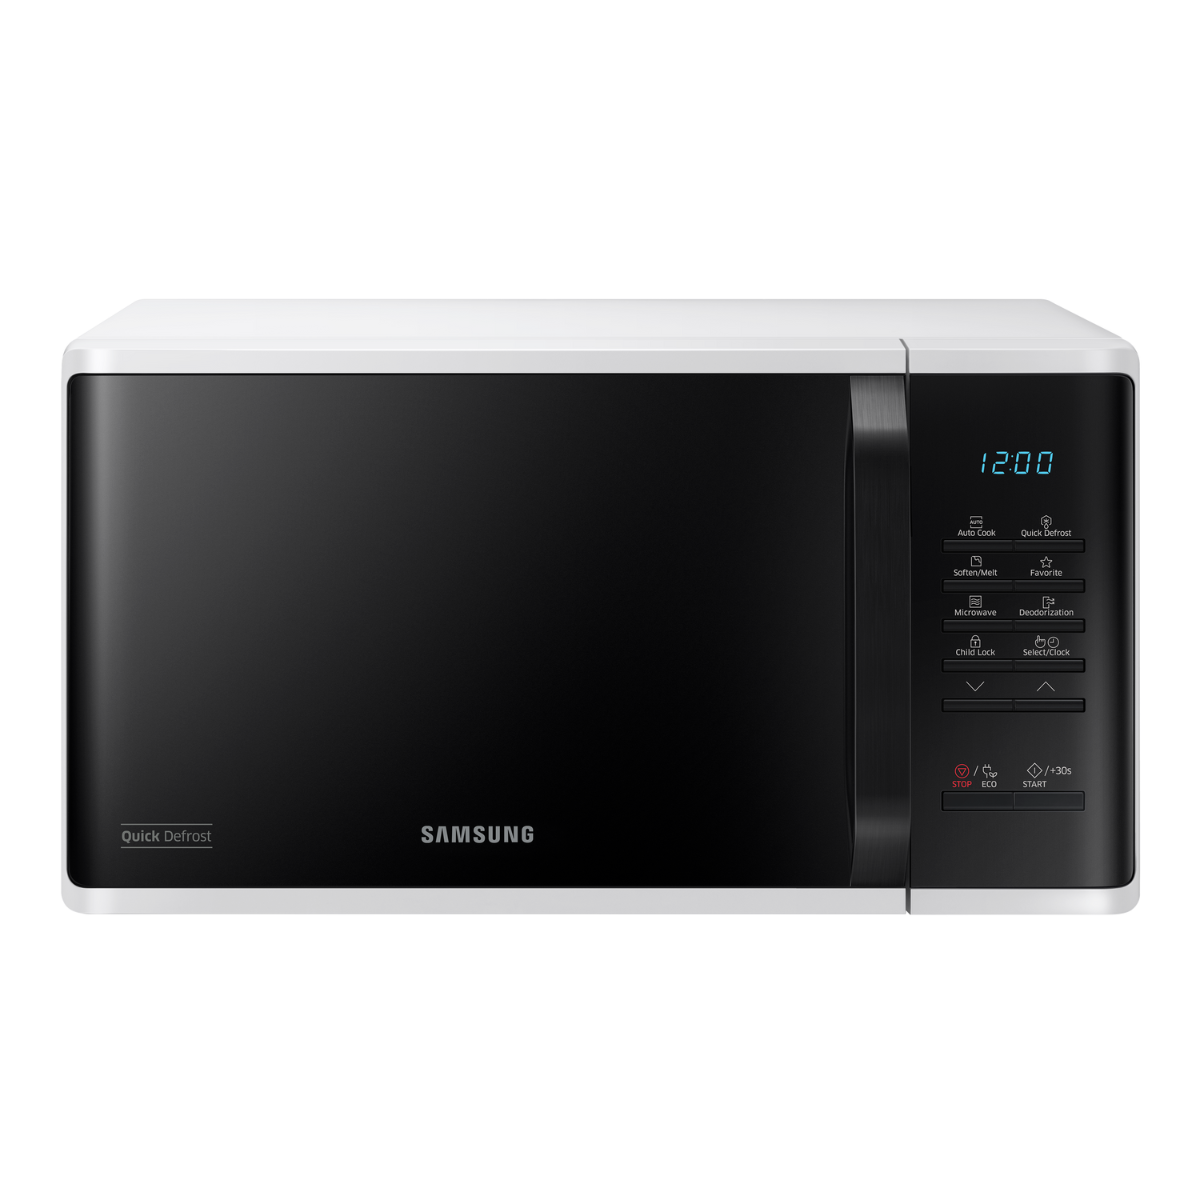 SAMSUNG MS23K3513 MICROWAVE OVEN 23LTS